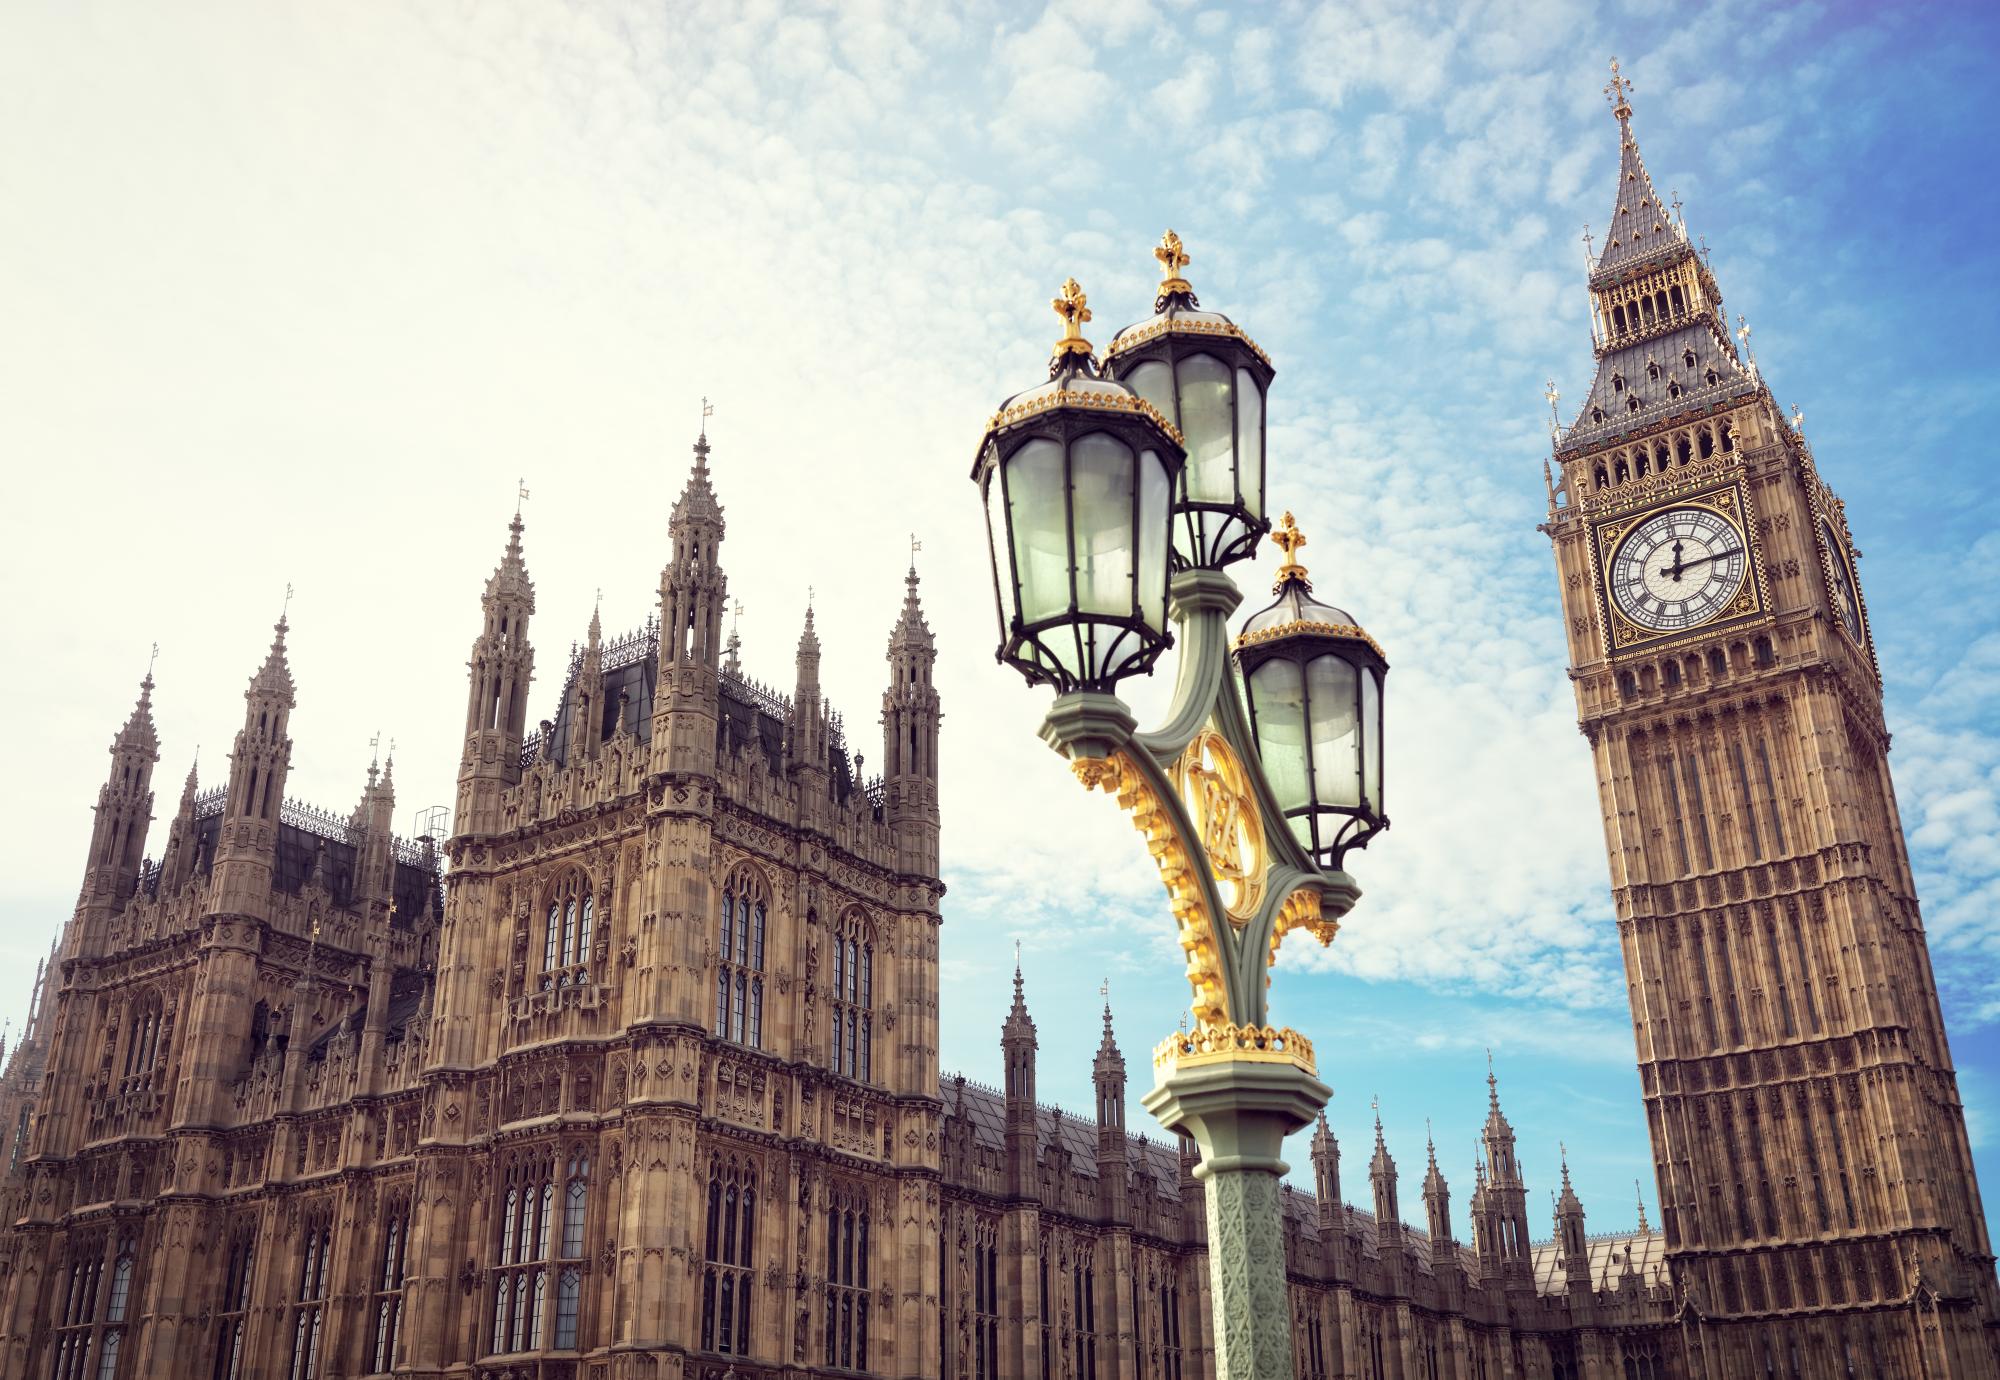 Big Ben in London with the houses of parliament and ornate street lamp.